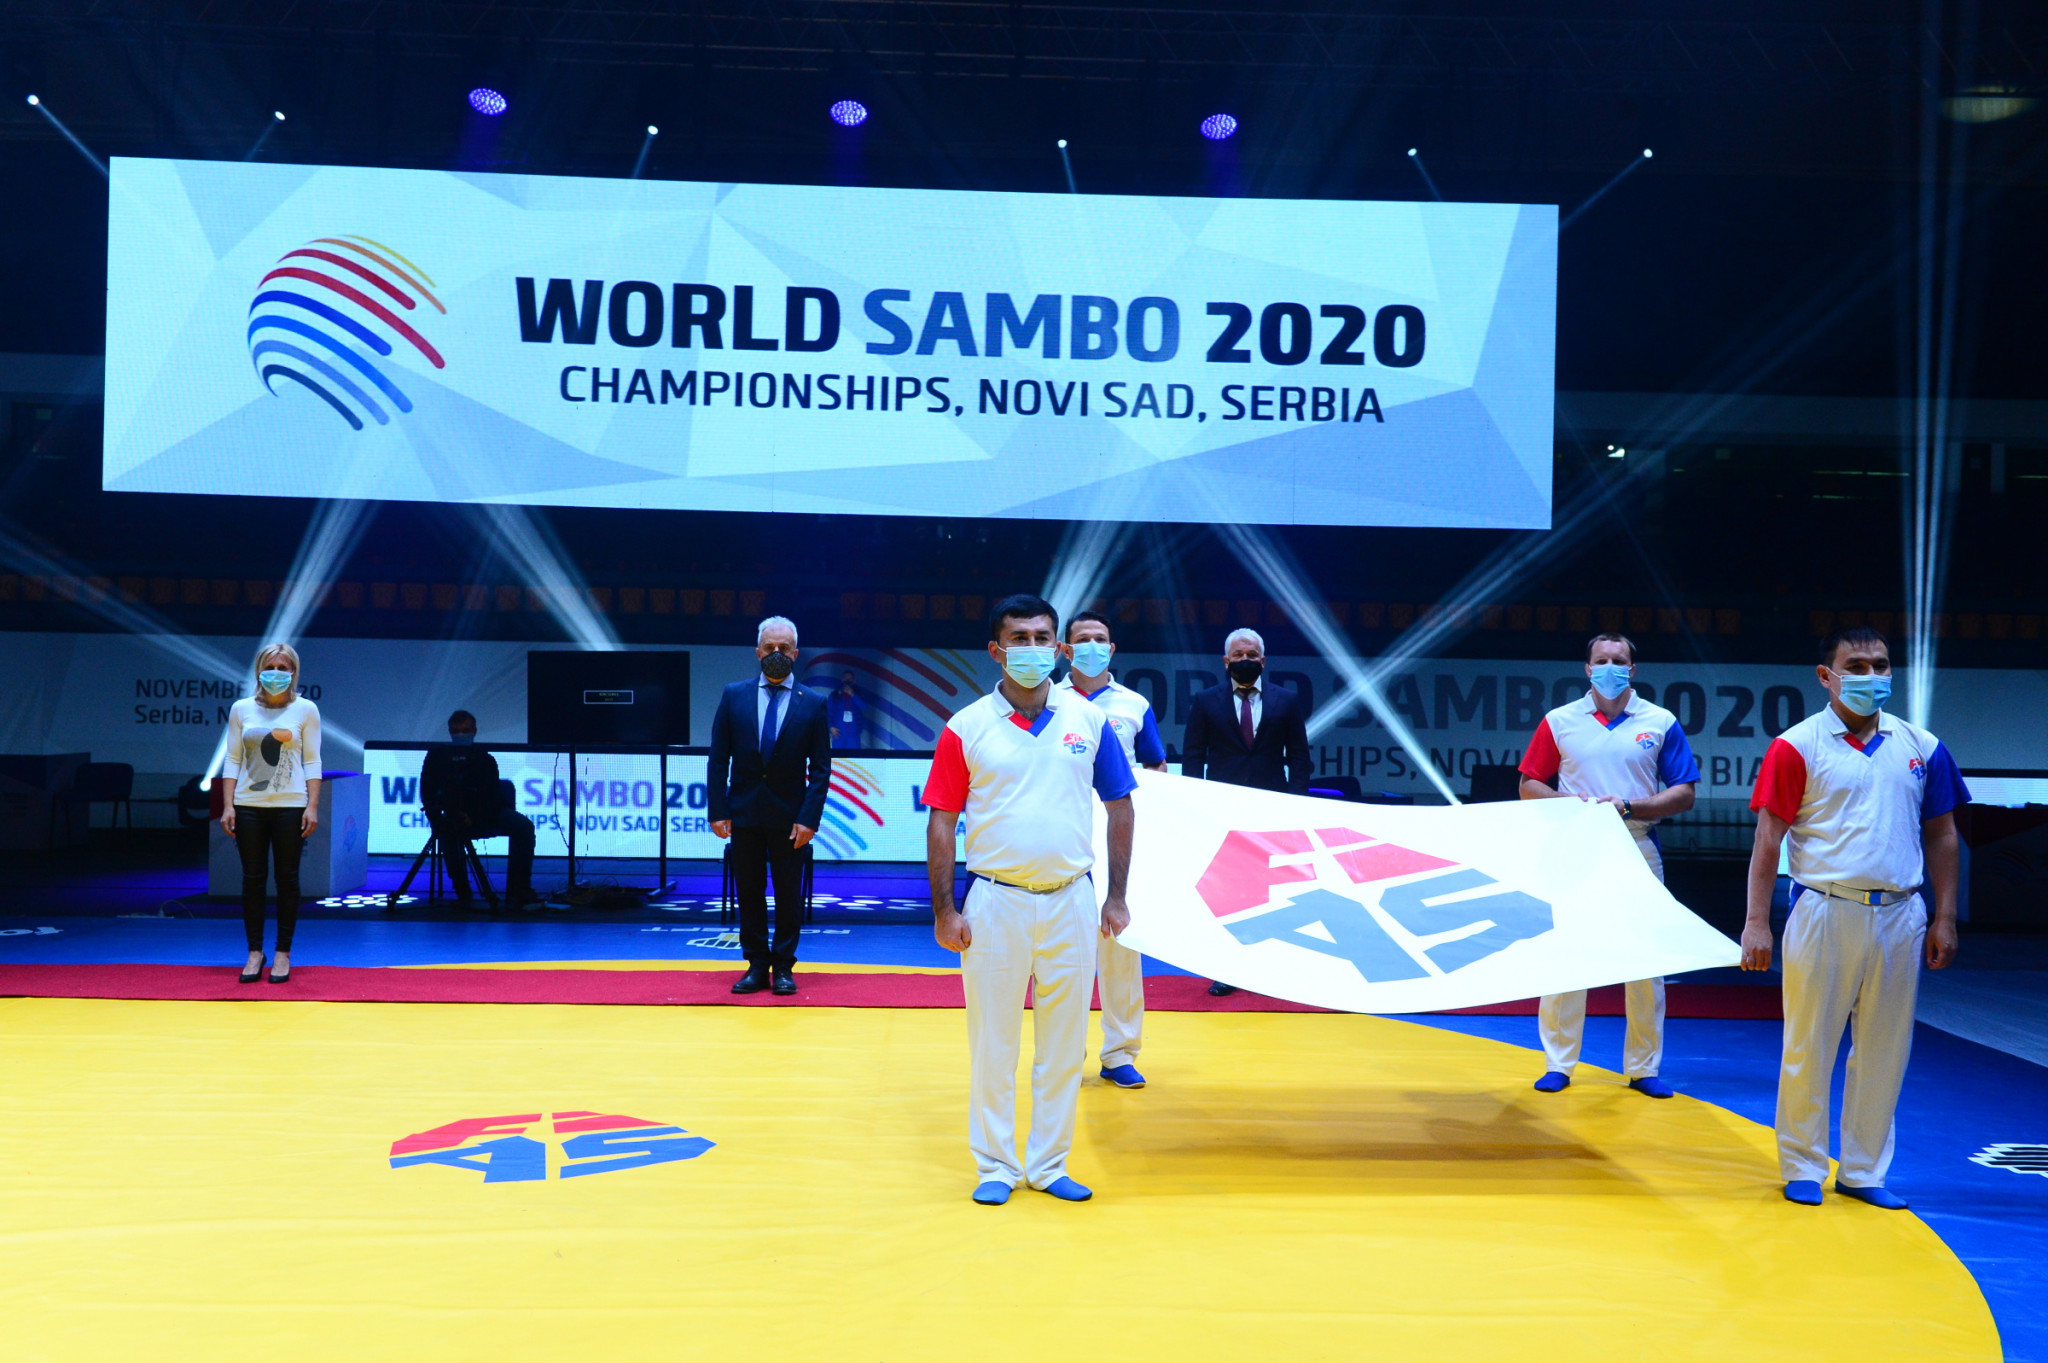 All personnel at the World Sambo Championships had to wear masks due to the COVID-19 pandemic ©FIAS